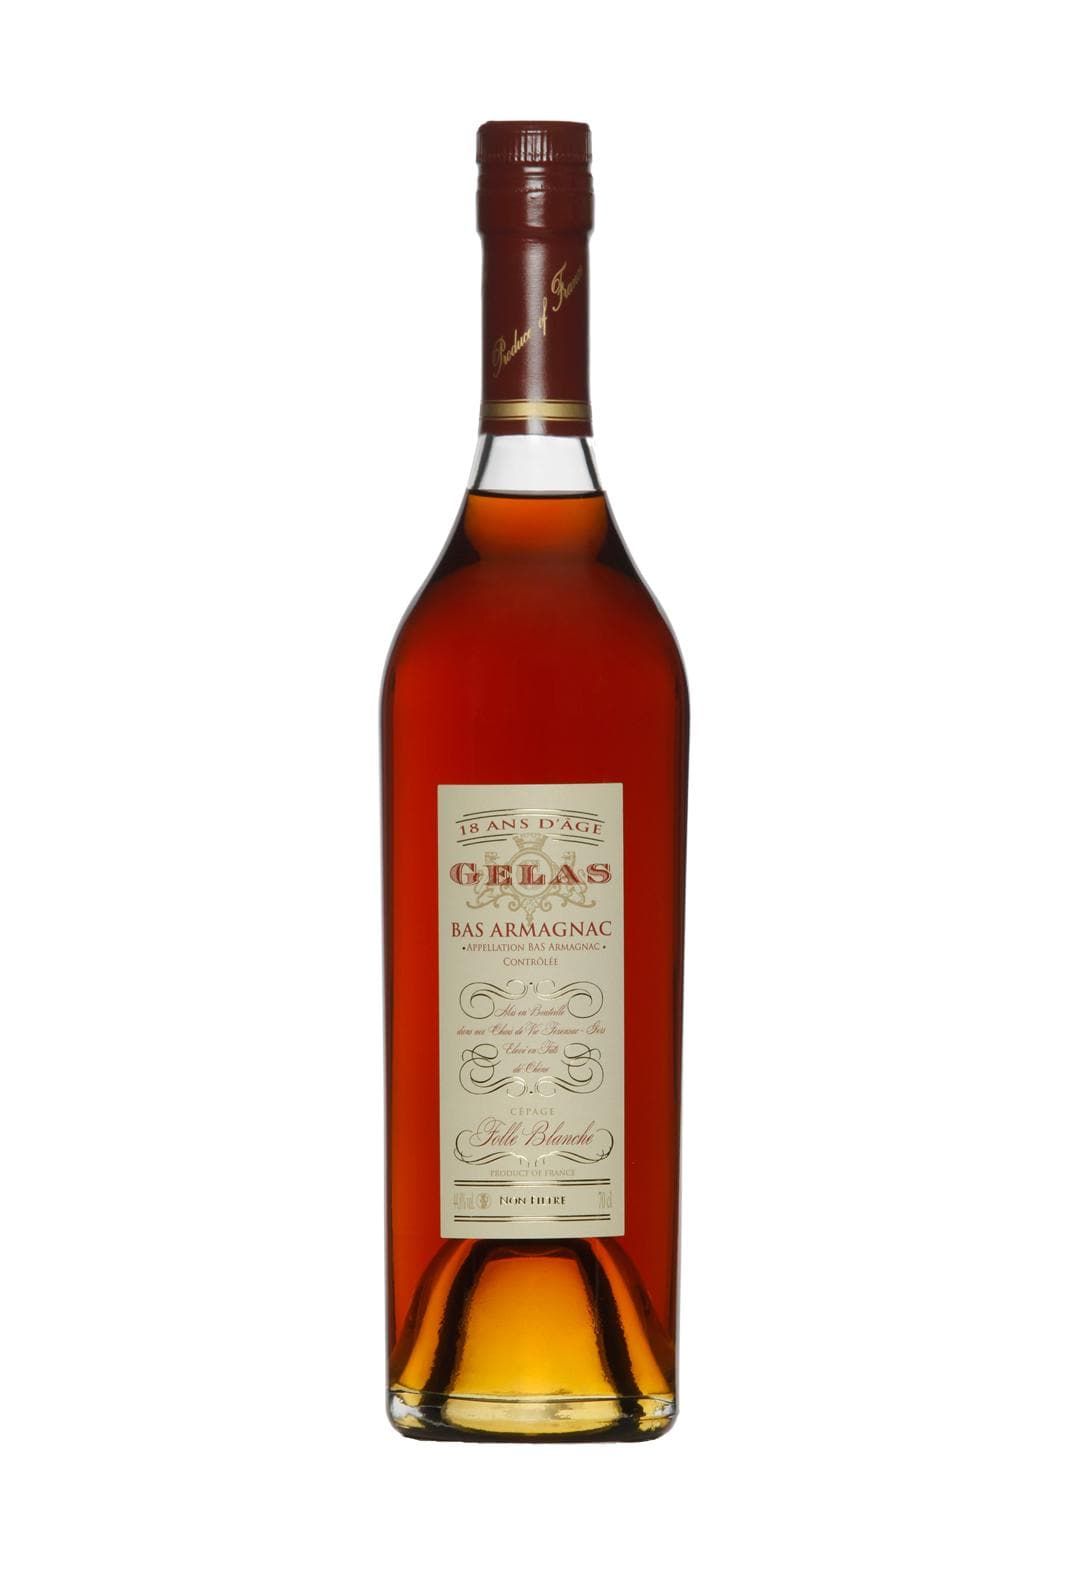 Gelas Bas Armagnac 18 years 100% Folle Blanche Unfiltered 44.7% 700ml | Brandy | Shop online at Spirits of France